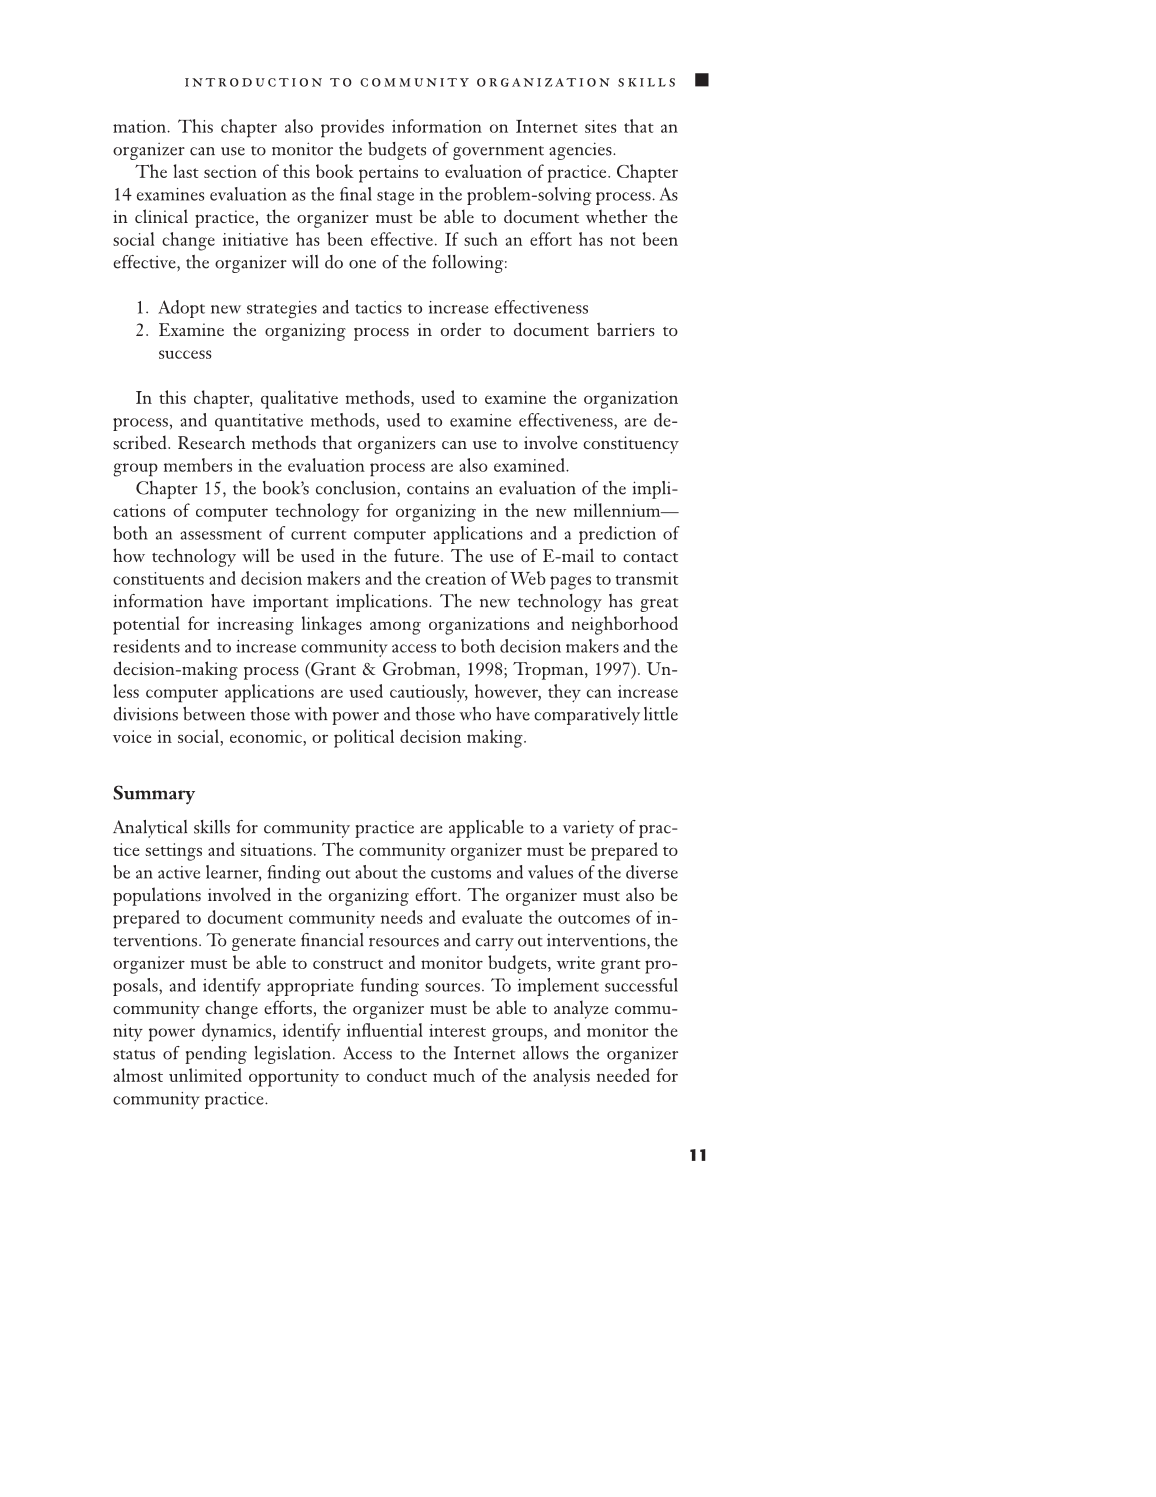 Analytical Skills for Community Organization Practice page 11